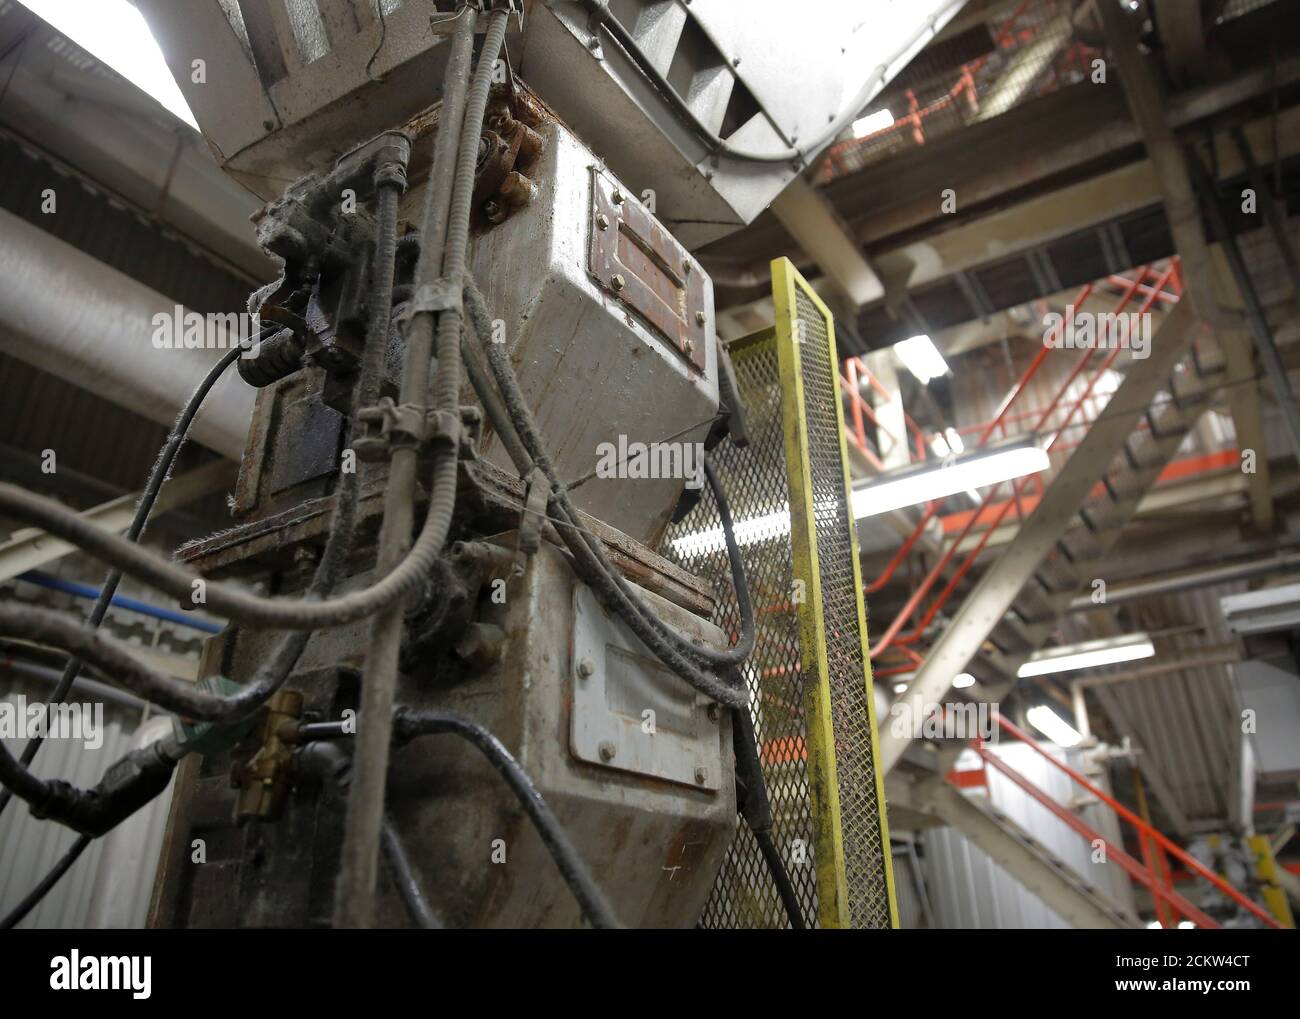 A valve system moves ash away from the bottom of the 1200 degree Celsius combustion chamber at the Vancouver Waste-To-Energy garbage facility, where garbage shipped from the Philippines will be processed, in Burnaby, British Columbia, Canada, June 17, 2019.  REUTERS/Lindsey Wasson Stock Photo